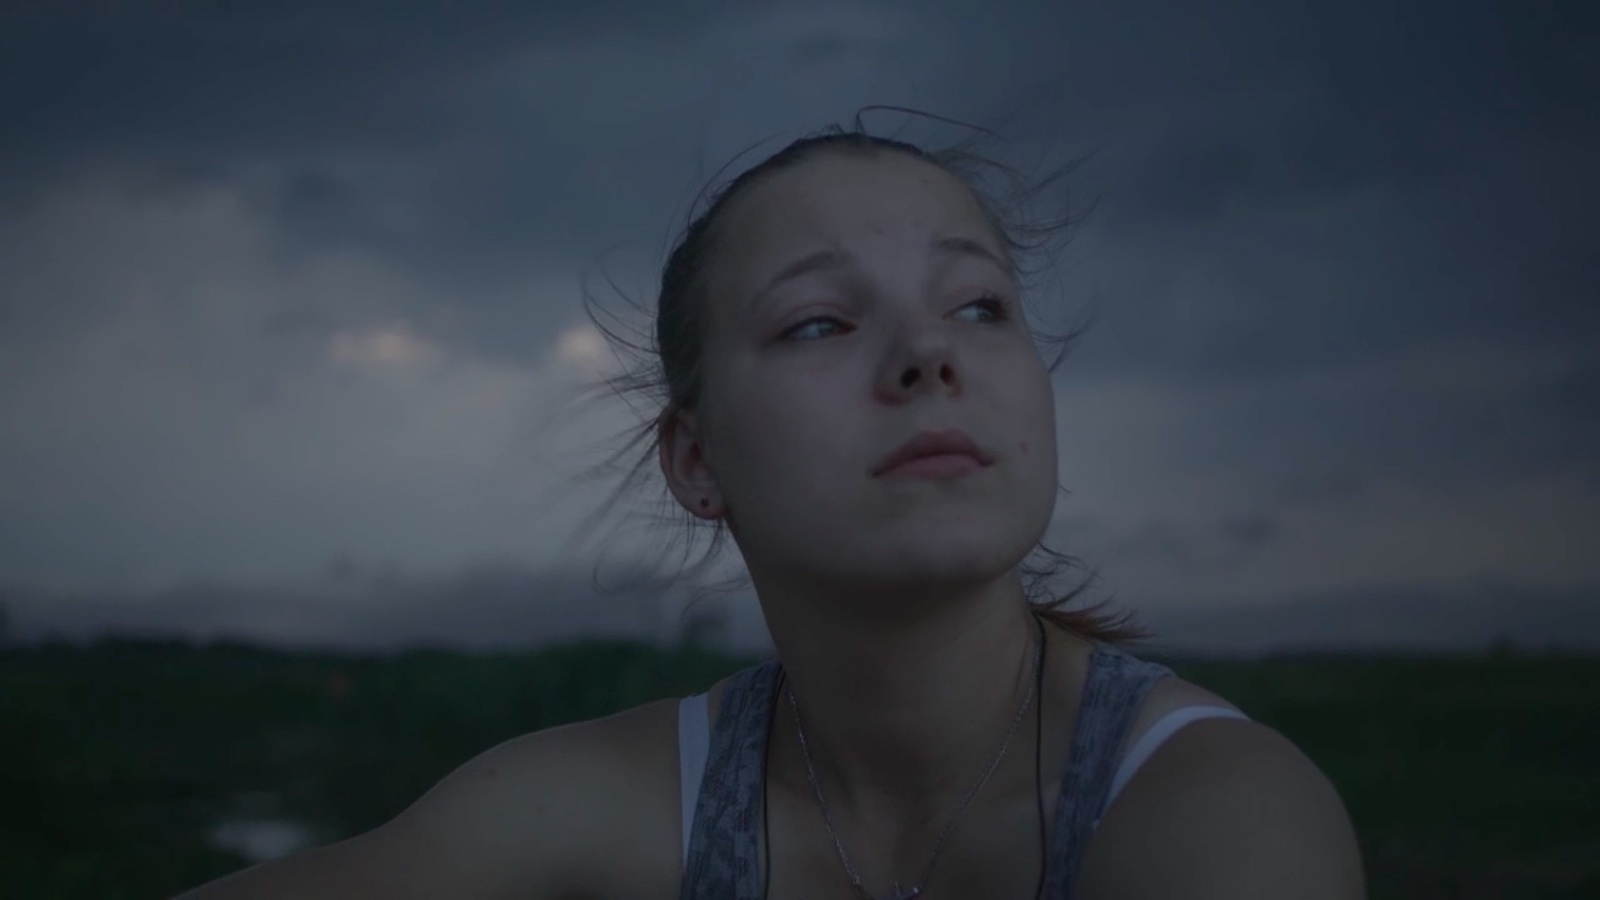 A young woman looks out into the gray sky